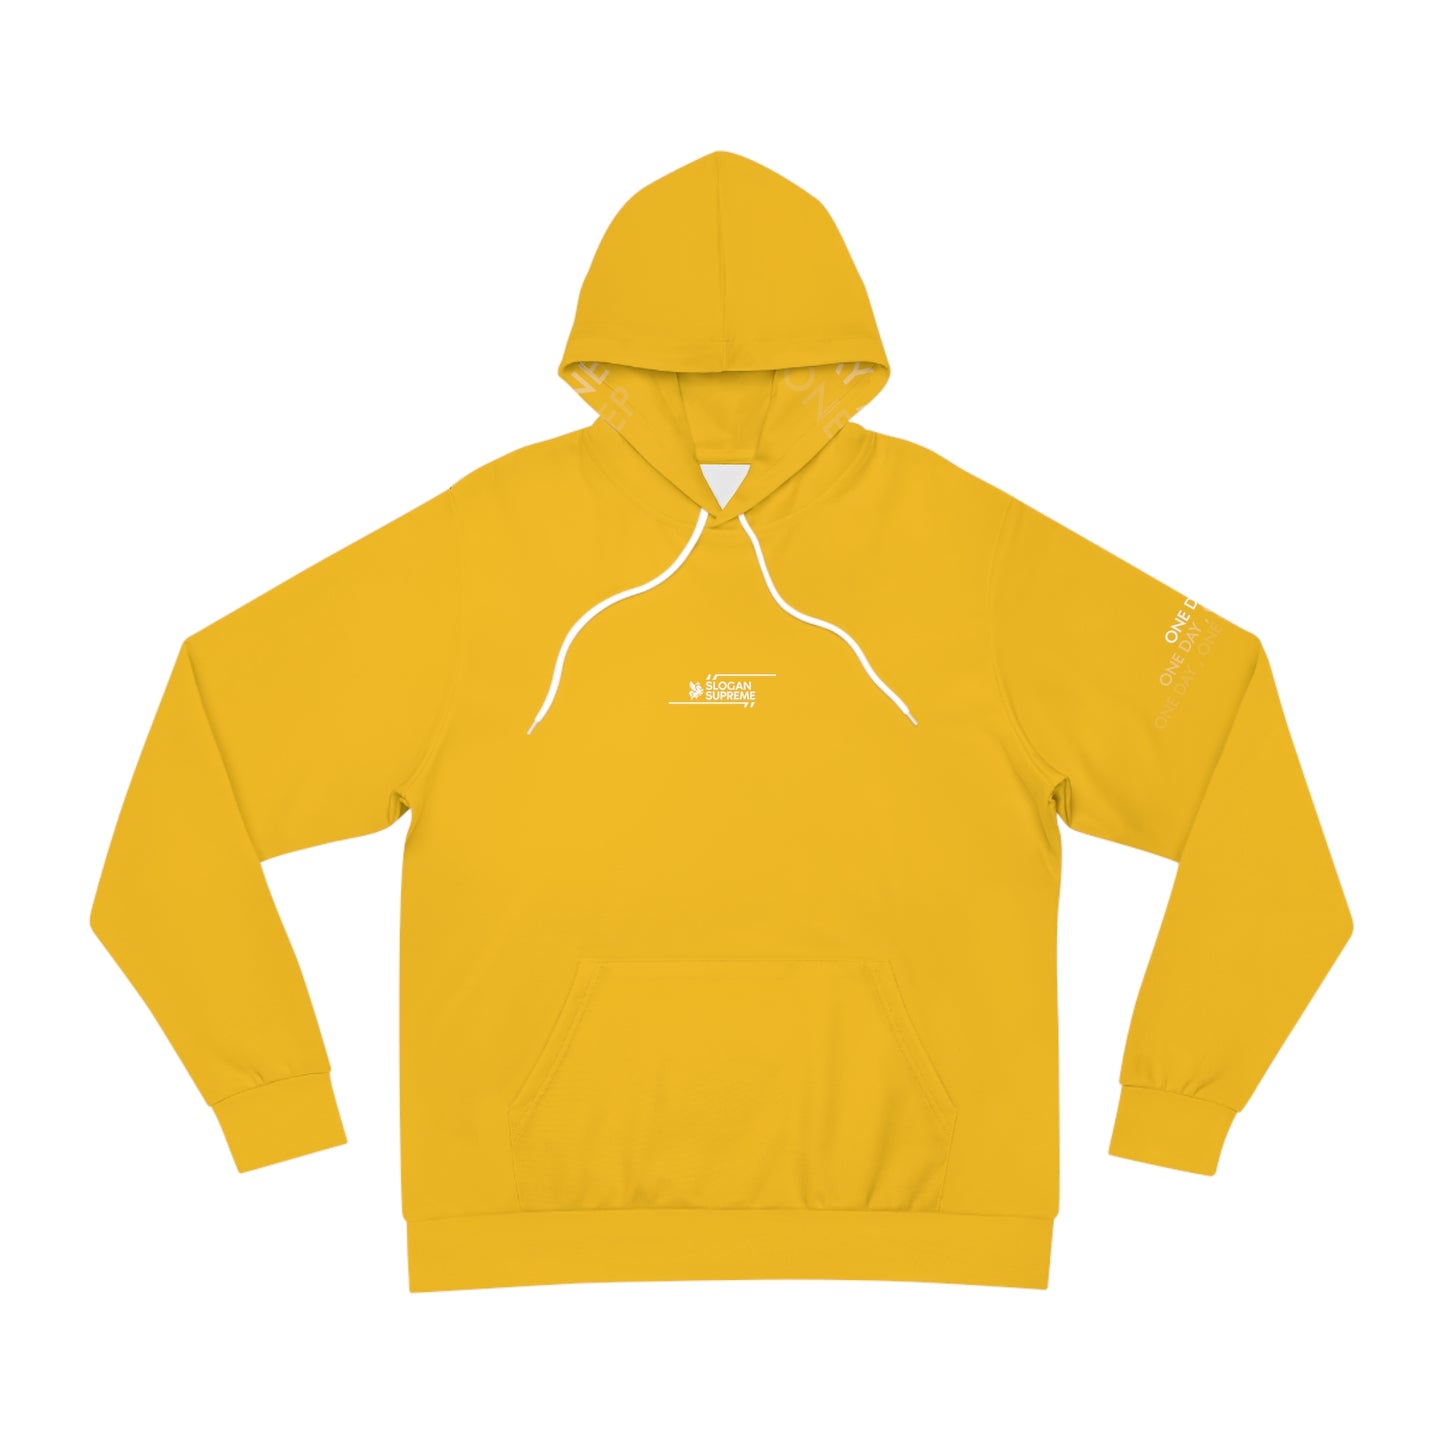 One Day , One Step Fashion Hoodie - Unisex - Yellow